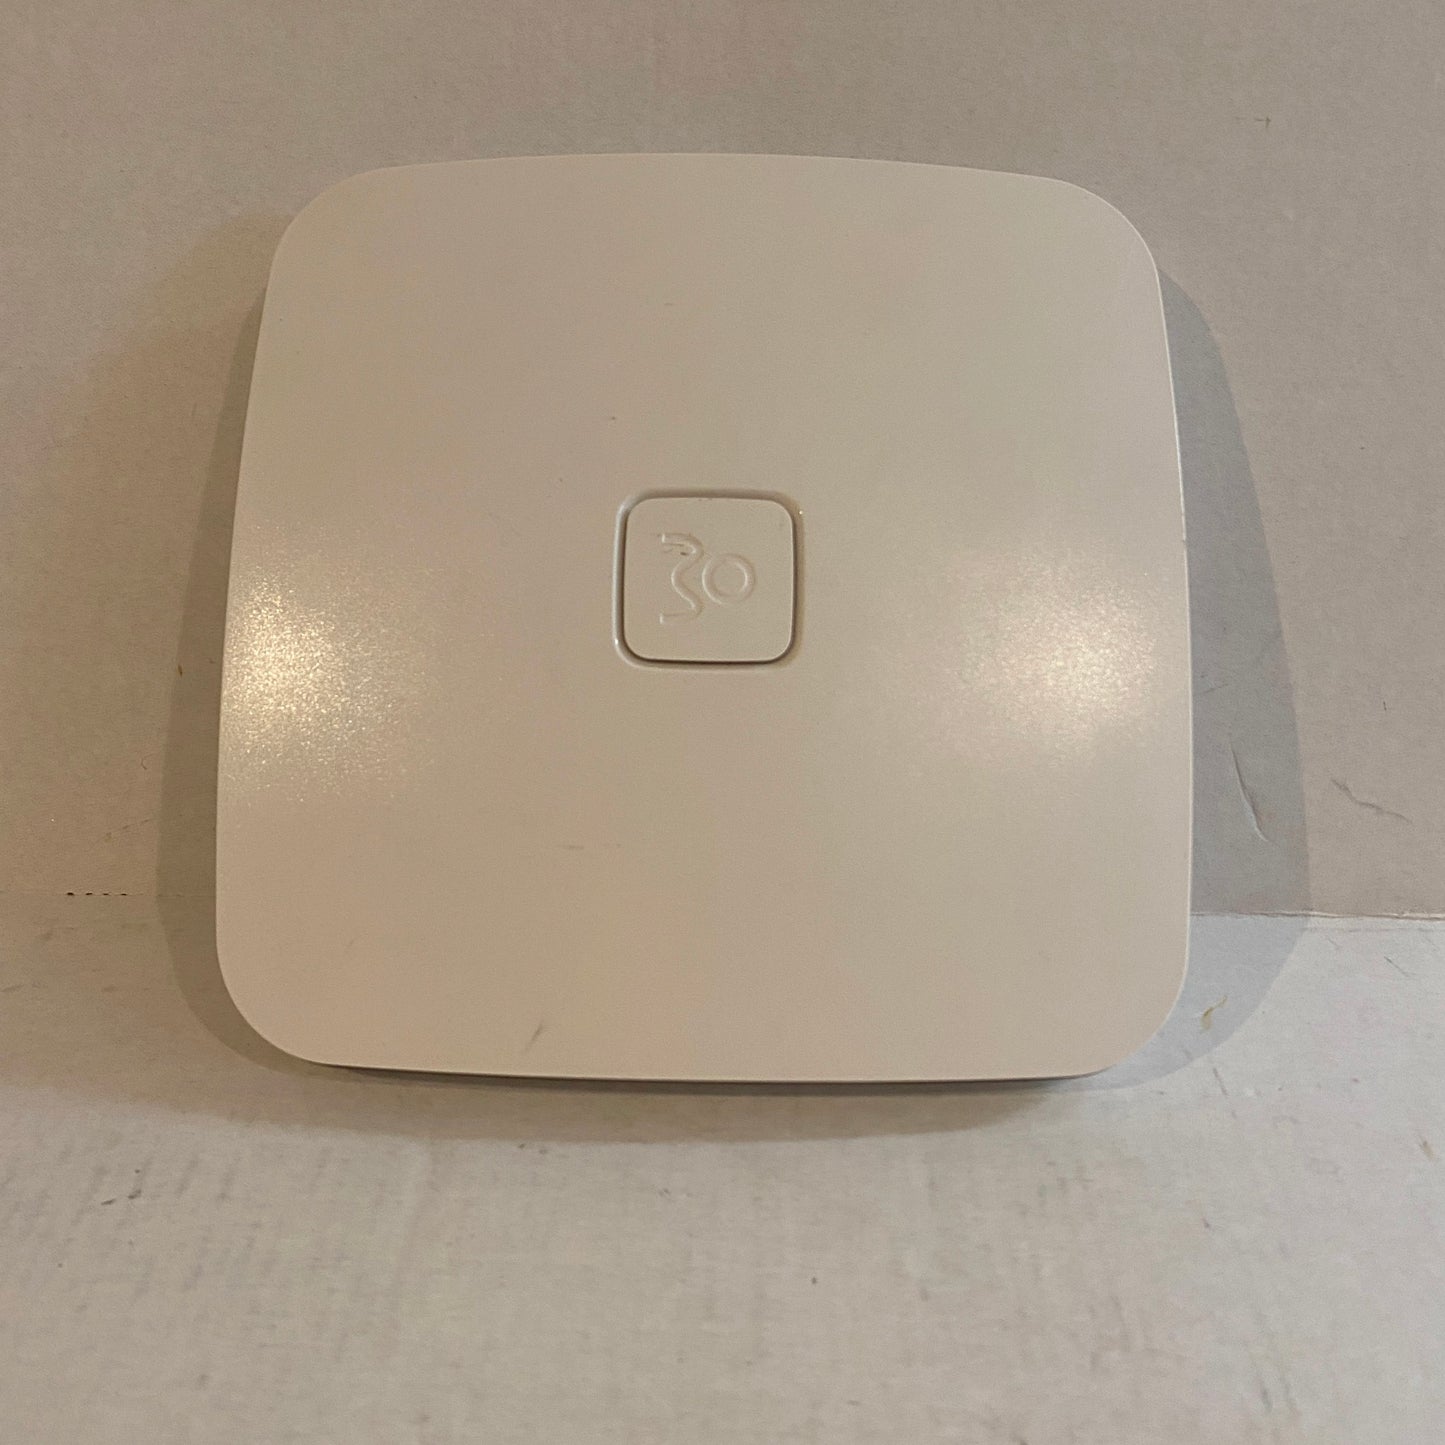 Open-Mesh A42 Dual-Band Enterprise Wi-Fi Access Point - No mounting plate